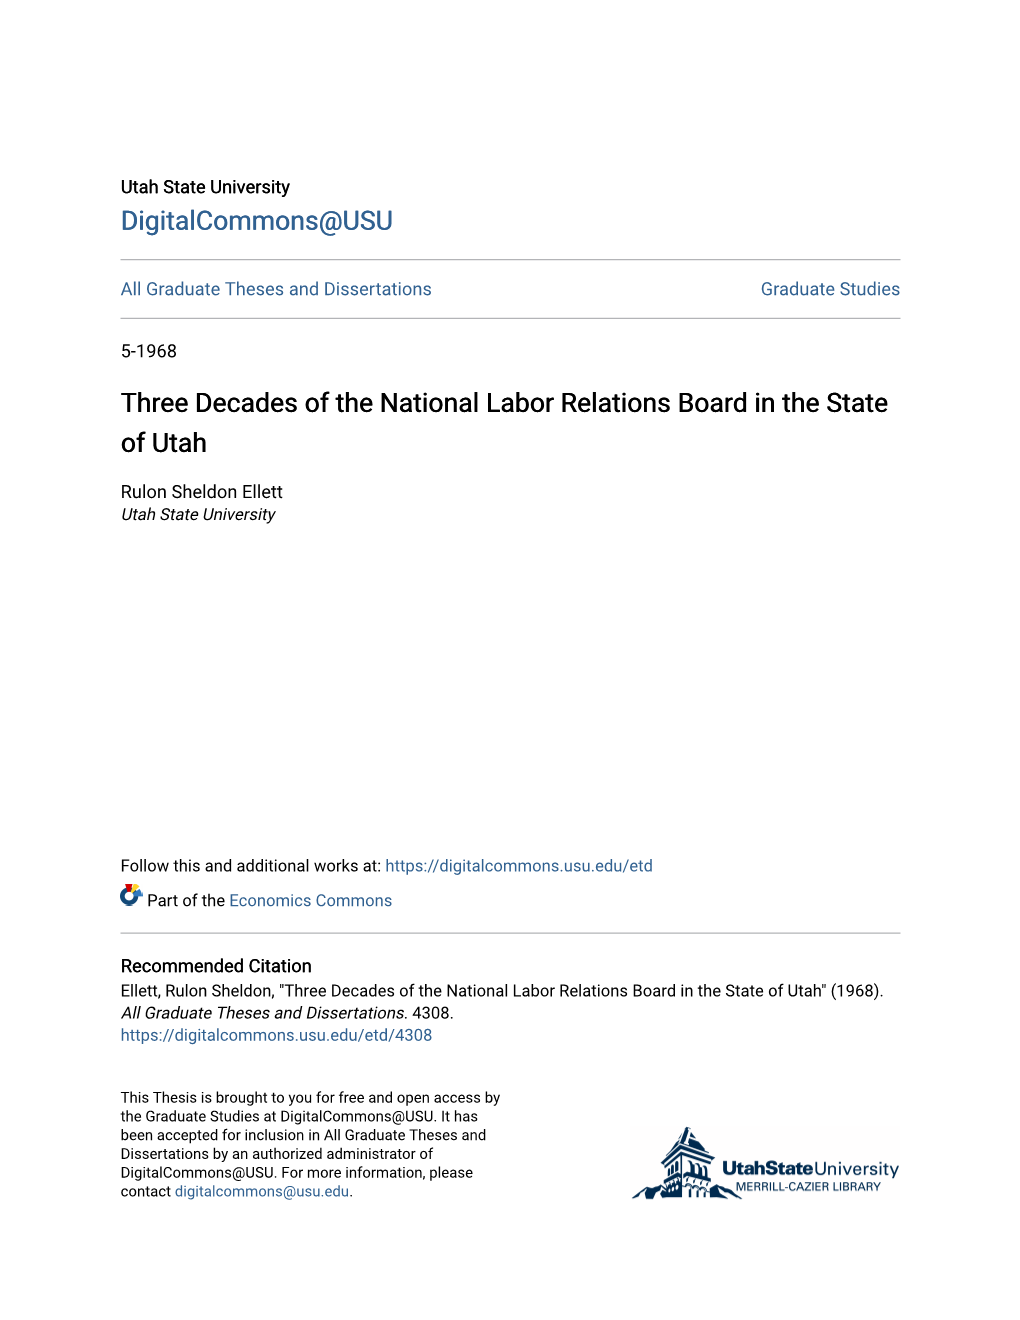 Three Decades of the National Labor Relations Board in the State of Utah